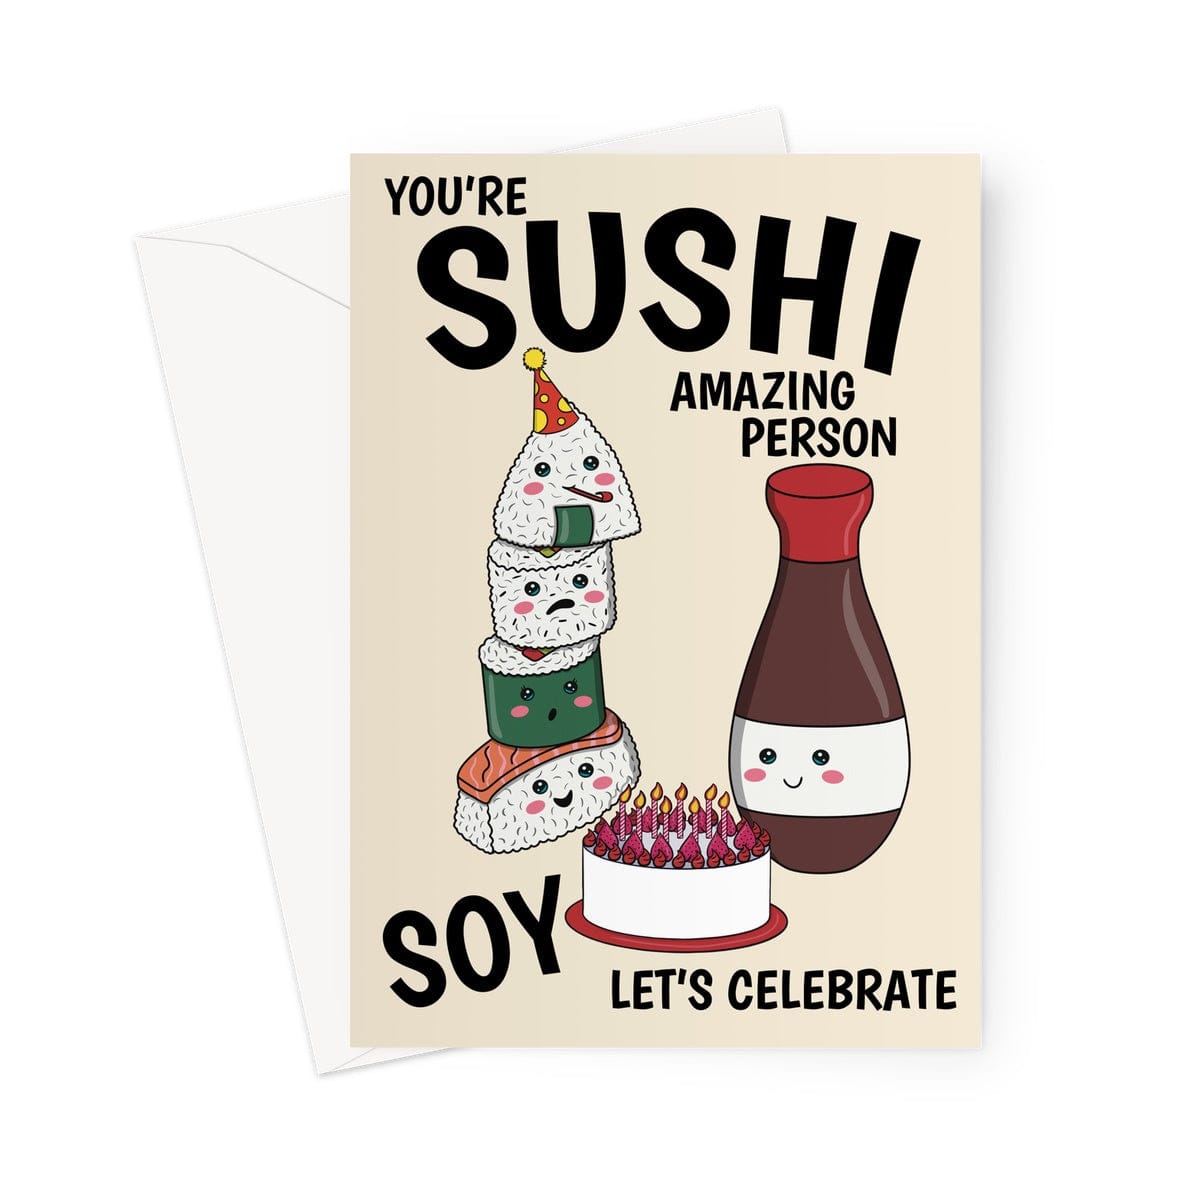 Japanese Sushi lover birthday card for an amazing person.